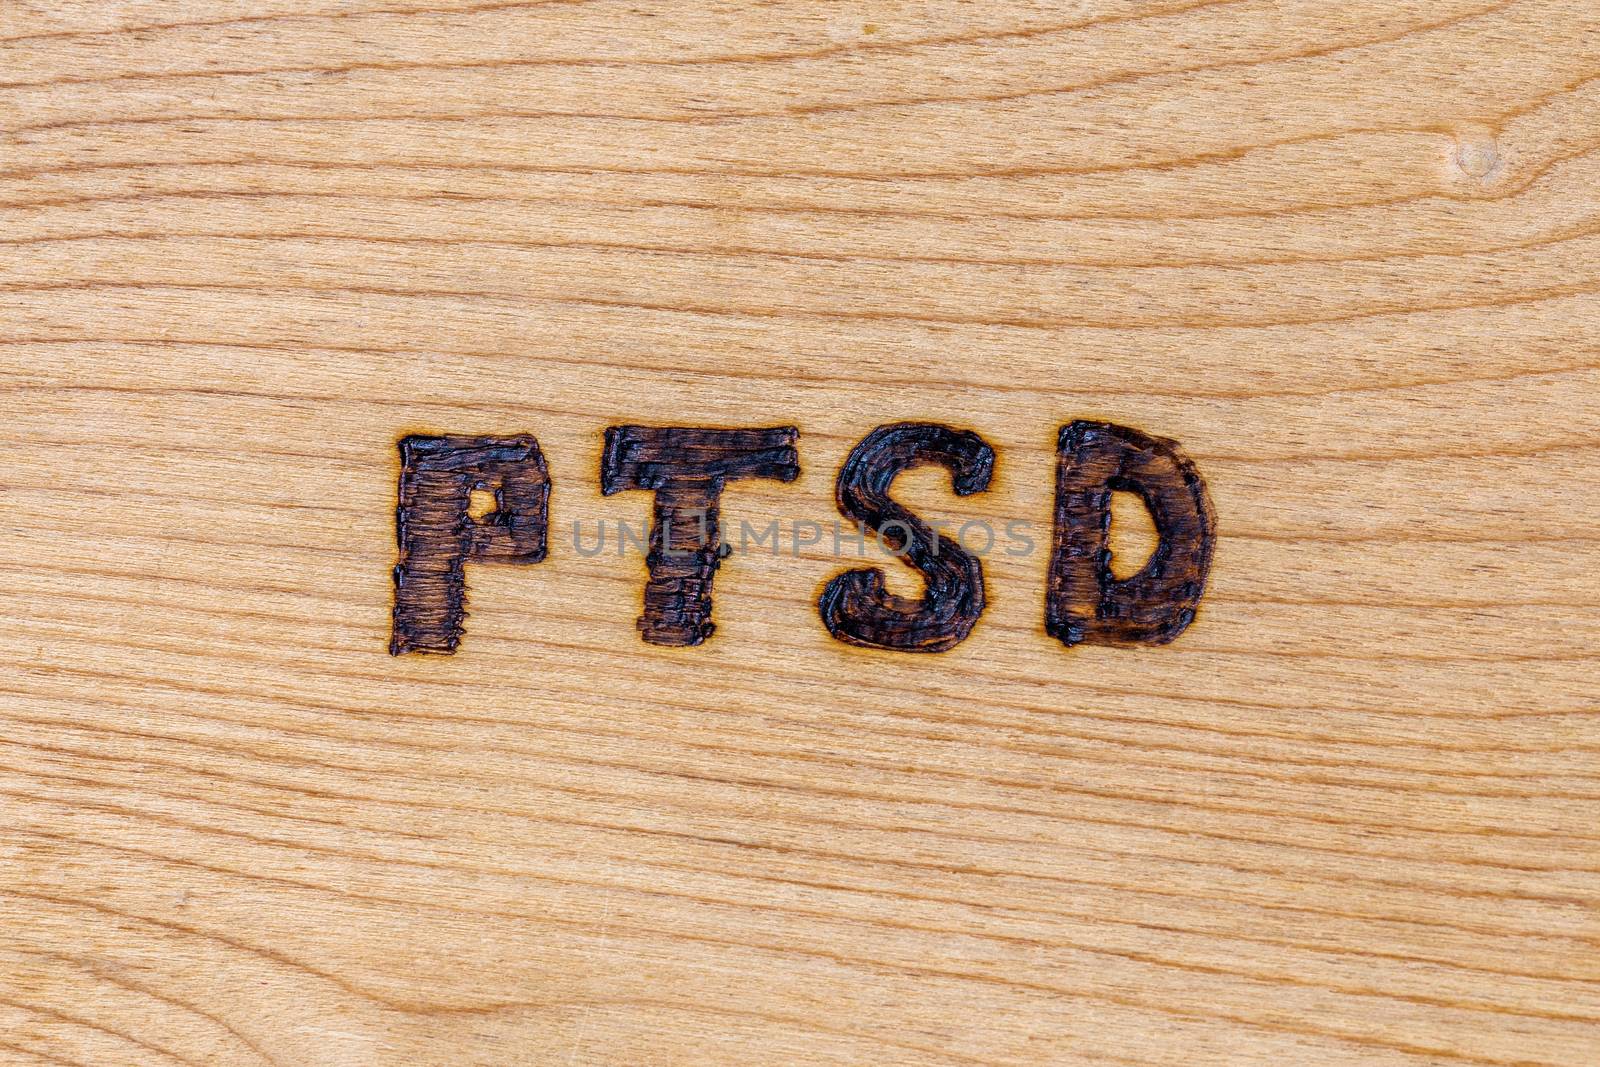 an abbreviation PTSD - post traumatic stress disorder - burned by hand on flat wooden board.